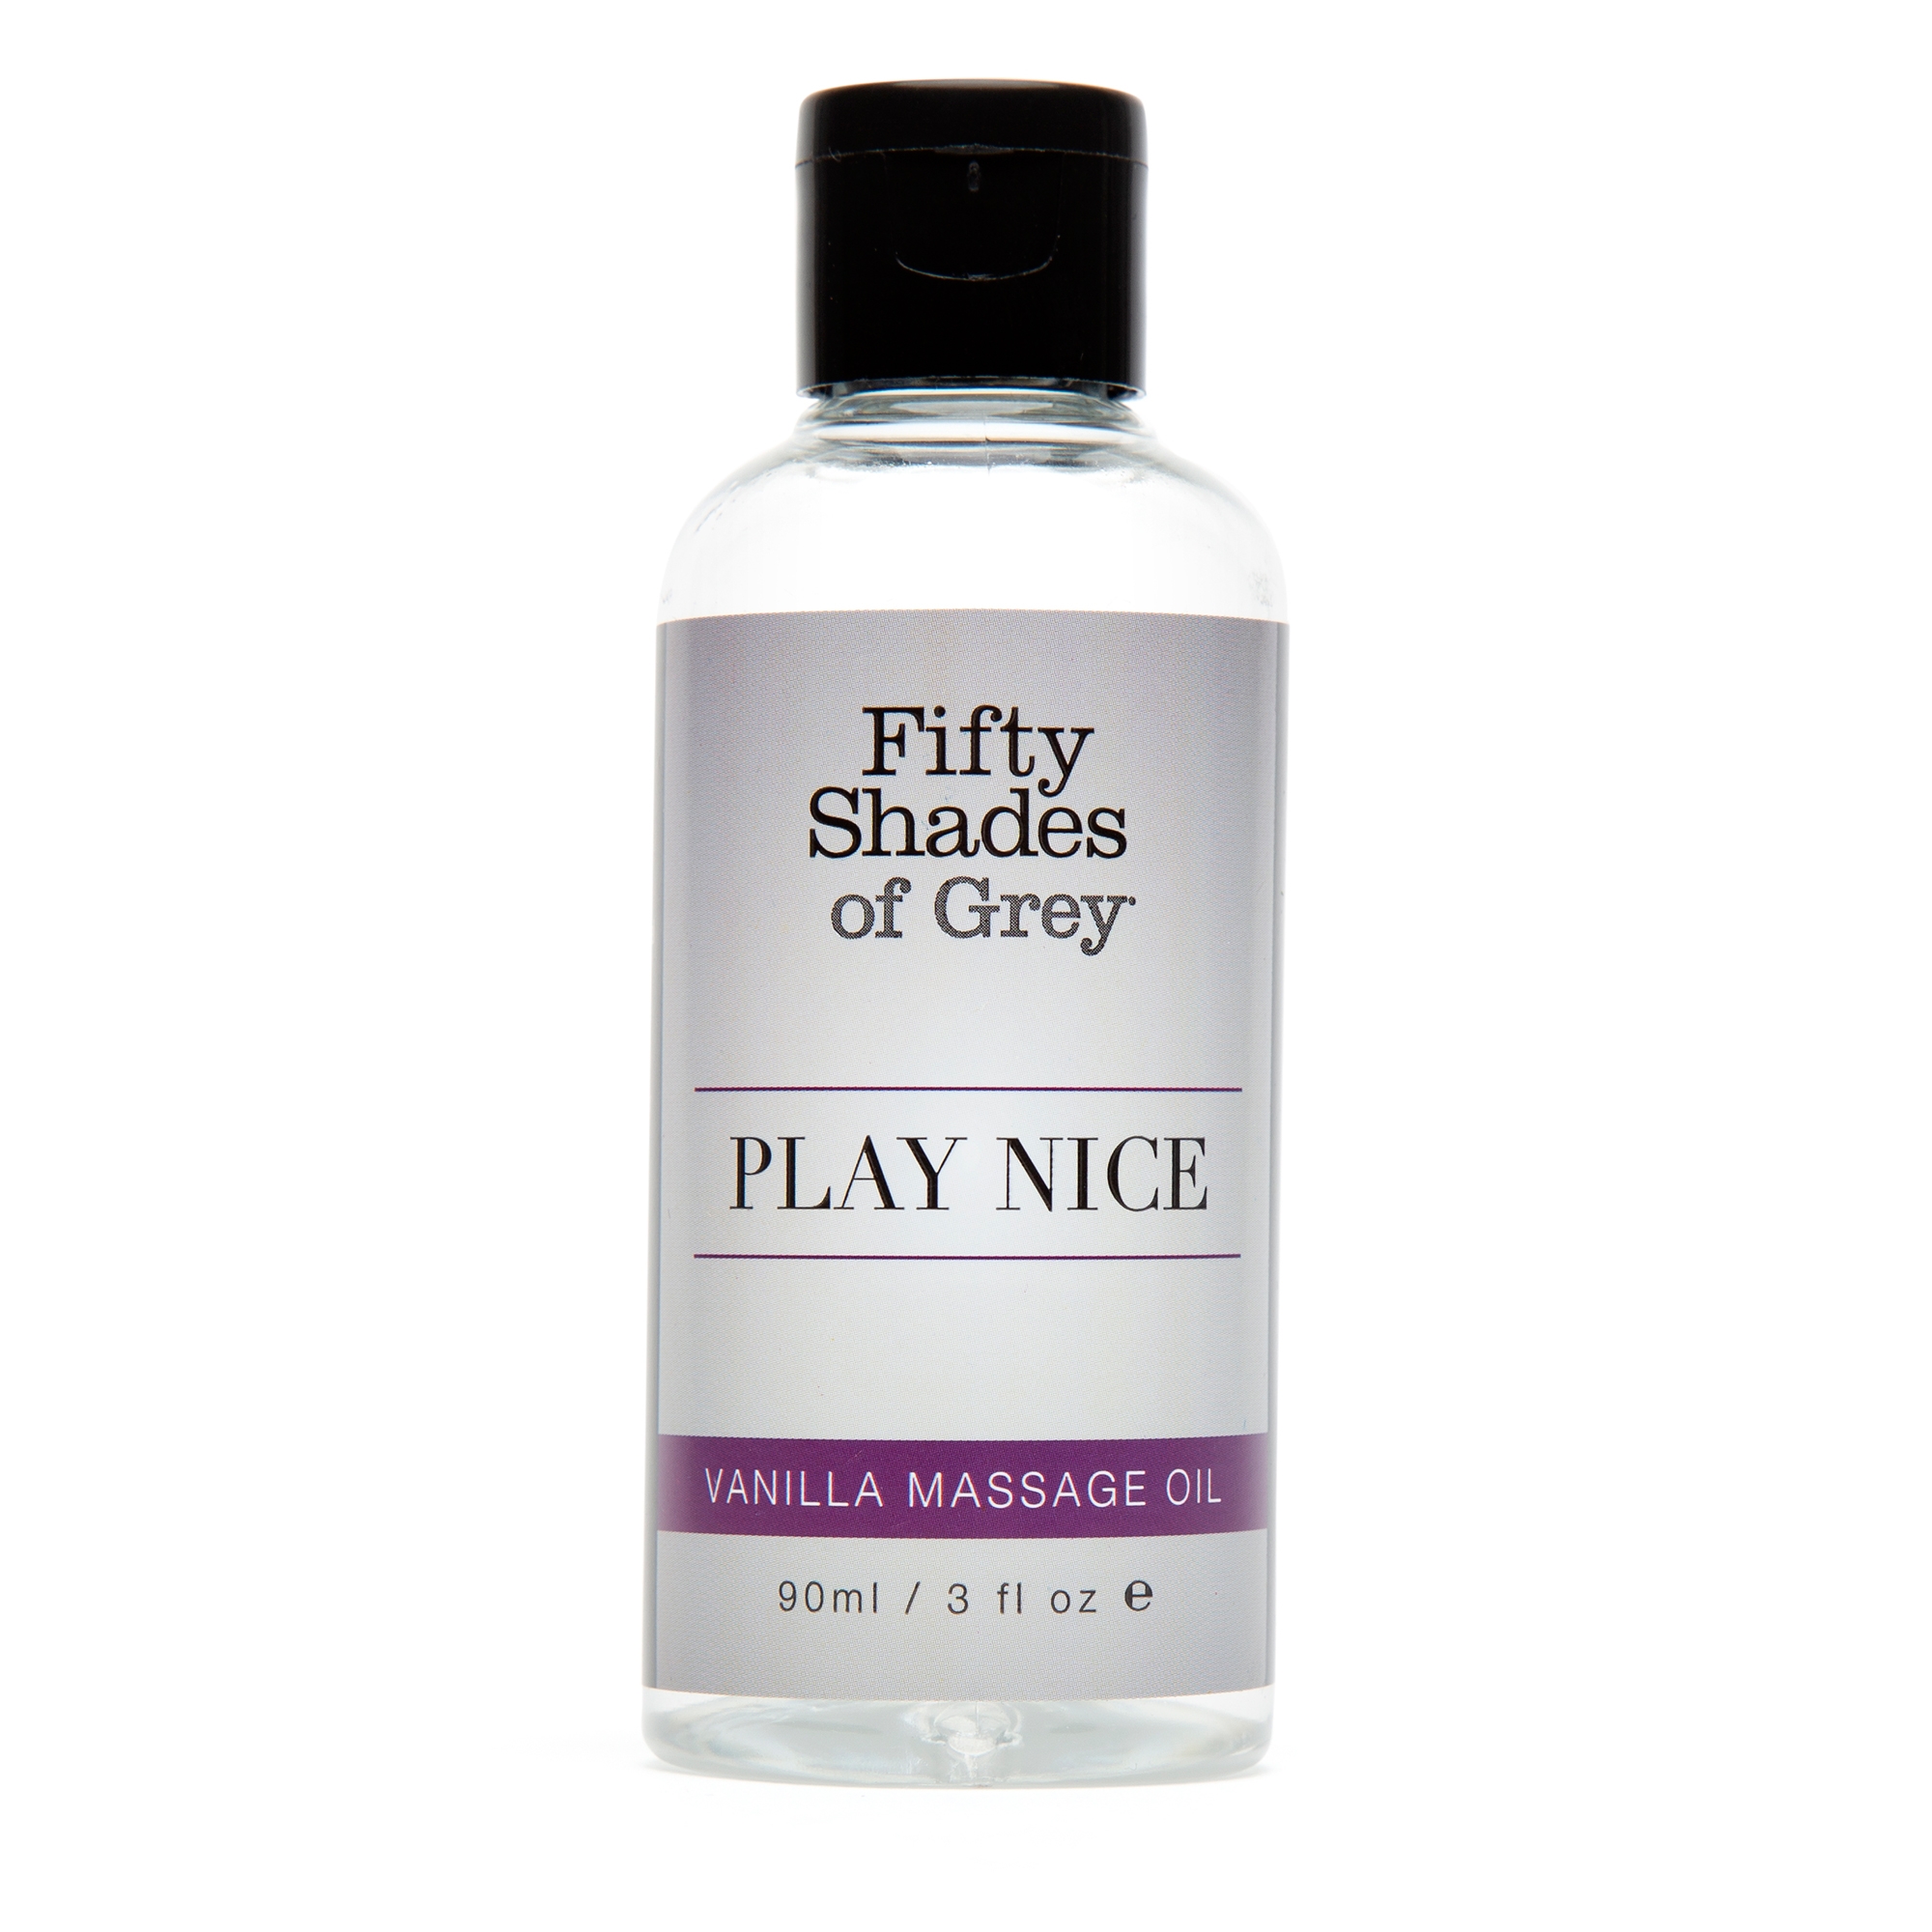 Huile de Massage Vanille Play Nice 90 ml Fifty Shades of Grey